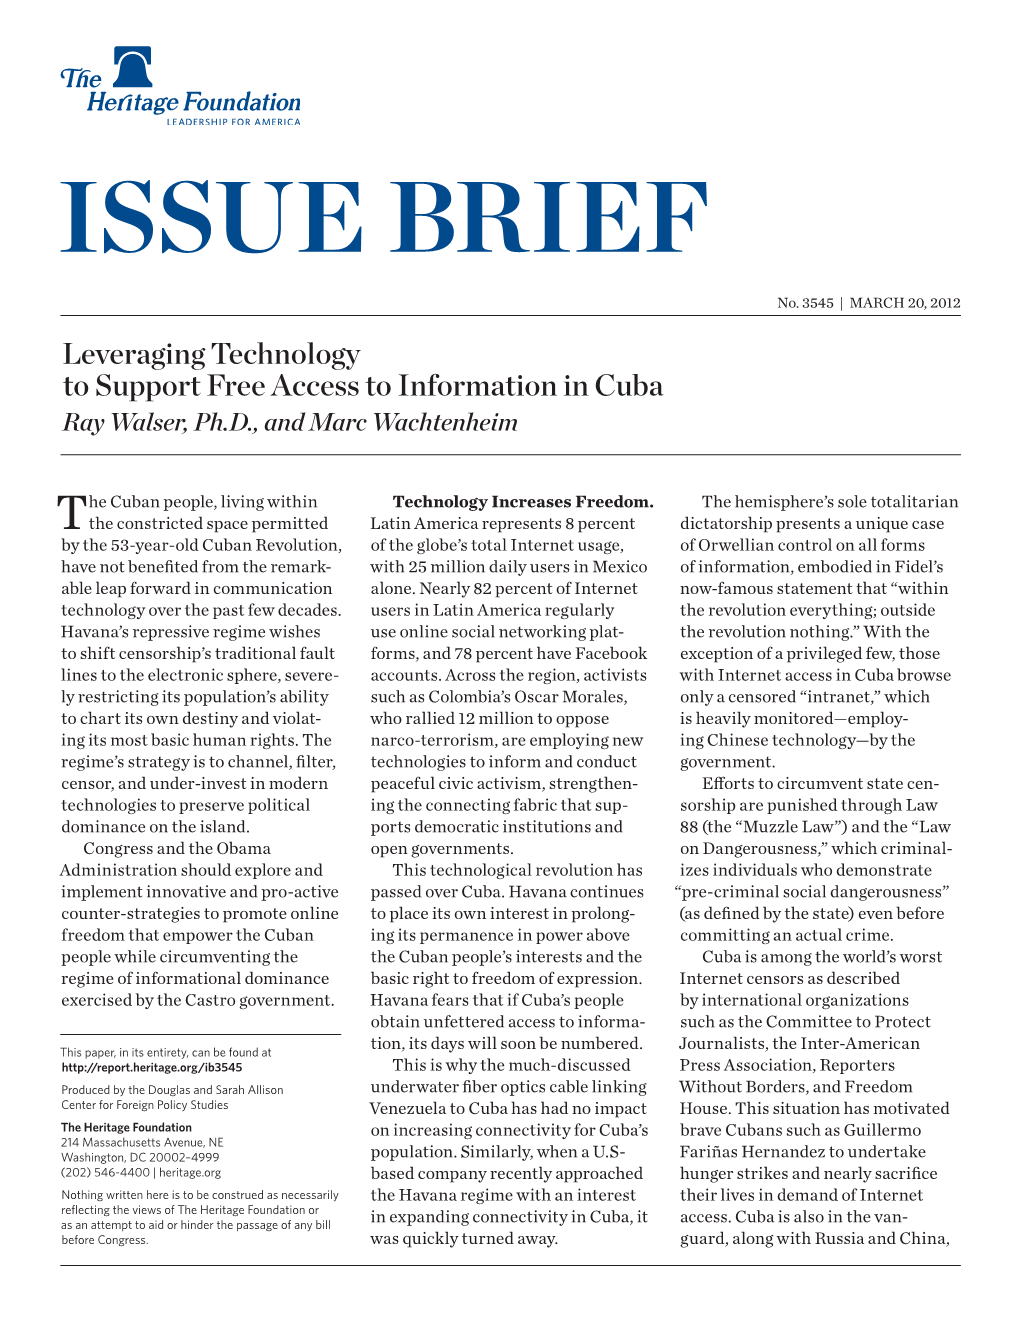 Leveraging Technology to Support Free Access to Information in Cuba Ray Walser, Ph.D., and Marc Wachtenheim